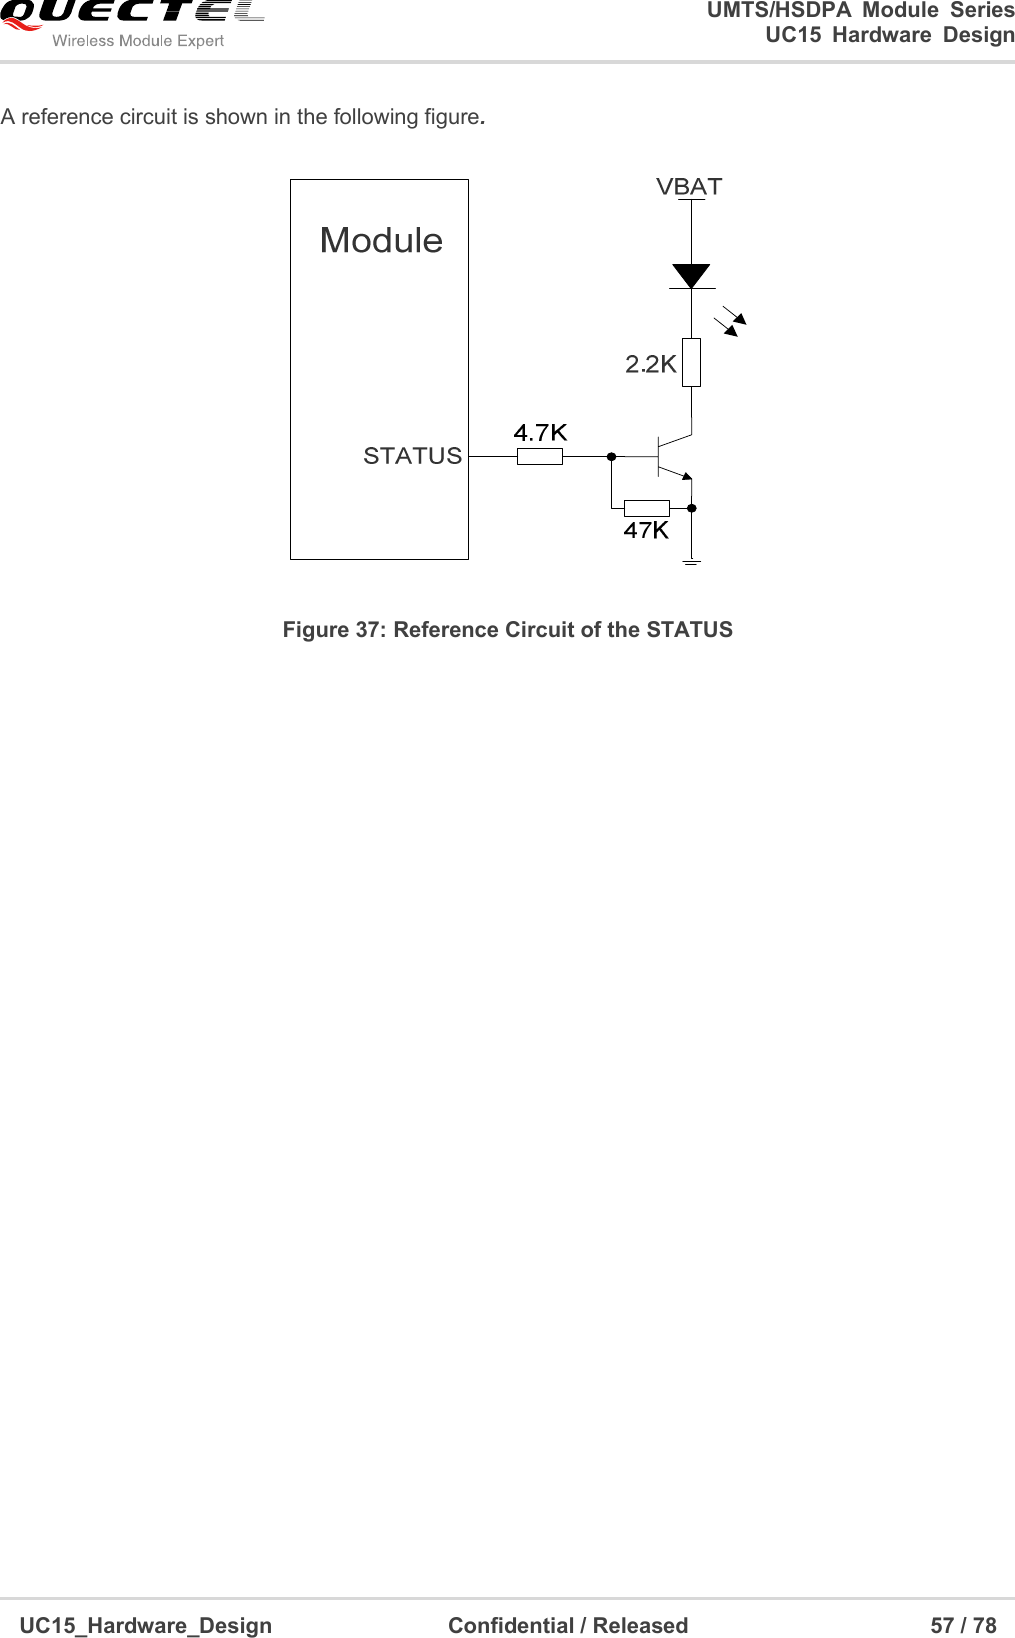                                                                        UMTS/HSDPA  Module  Series                                                                 UC15 Hardware Design  UC15_Hardware_Design                                Confidential / Released                                            57 / 78    A reference circuit is shown in the following figure.  Figure 37: Reference Circuit of the STATUS 